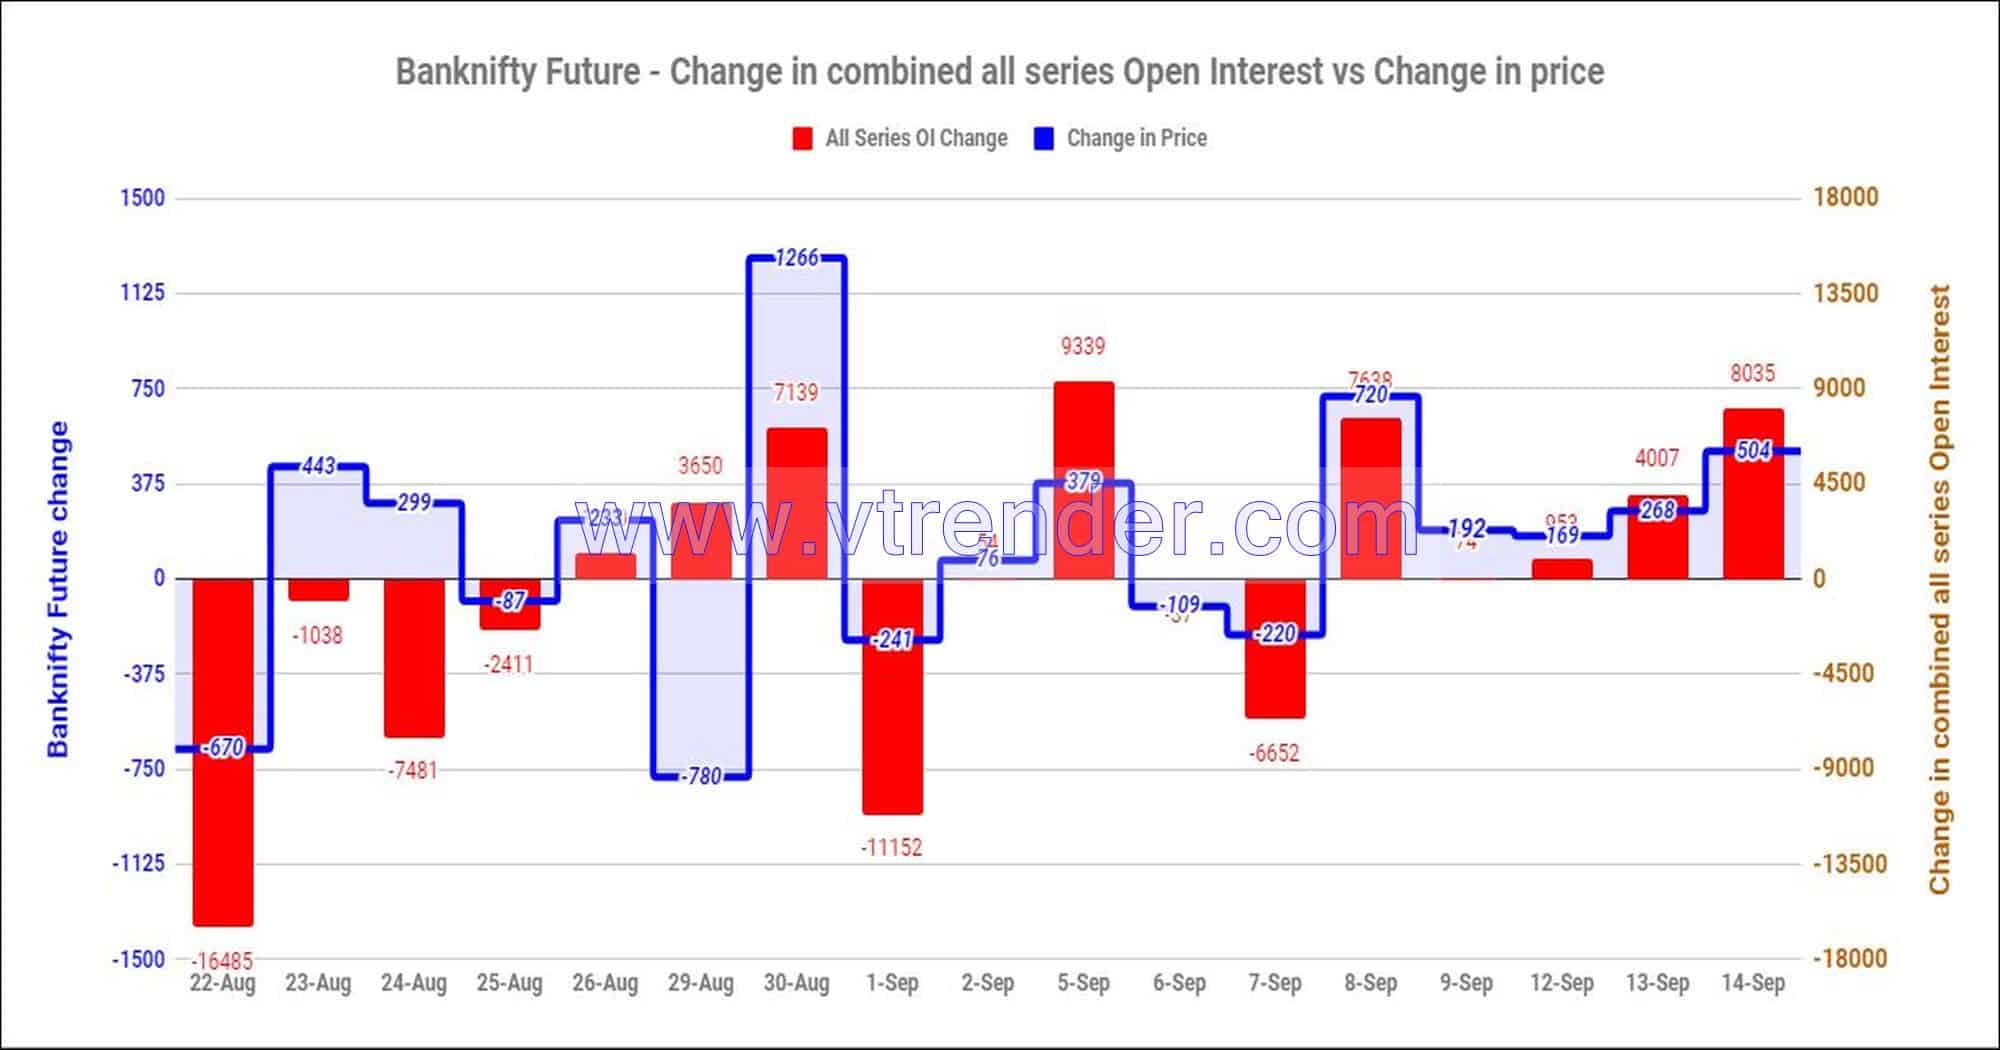 Bnfas14Sep Nifty And Banknifty Futures With All Series Combined Open Interest – 14Th Sep 2022 Banknifty, Nifty, Open Interest